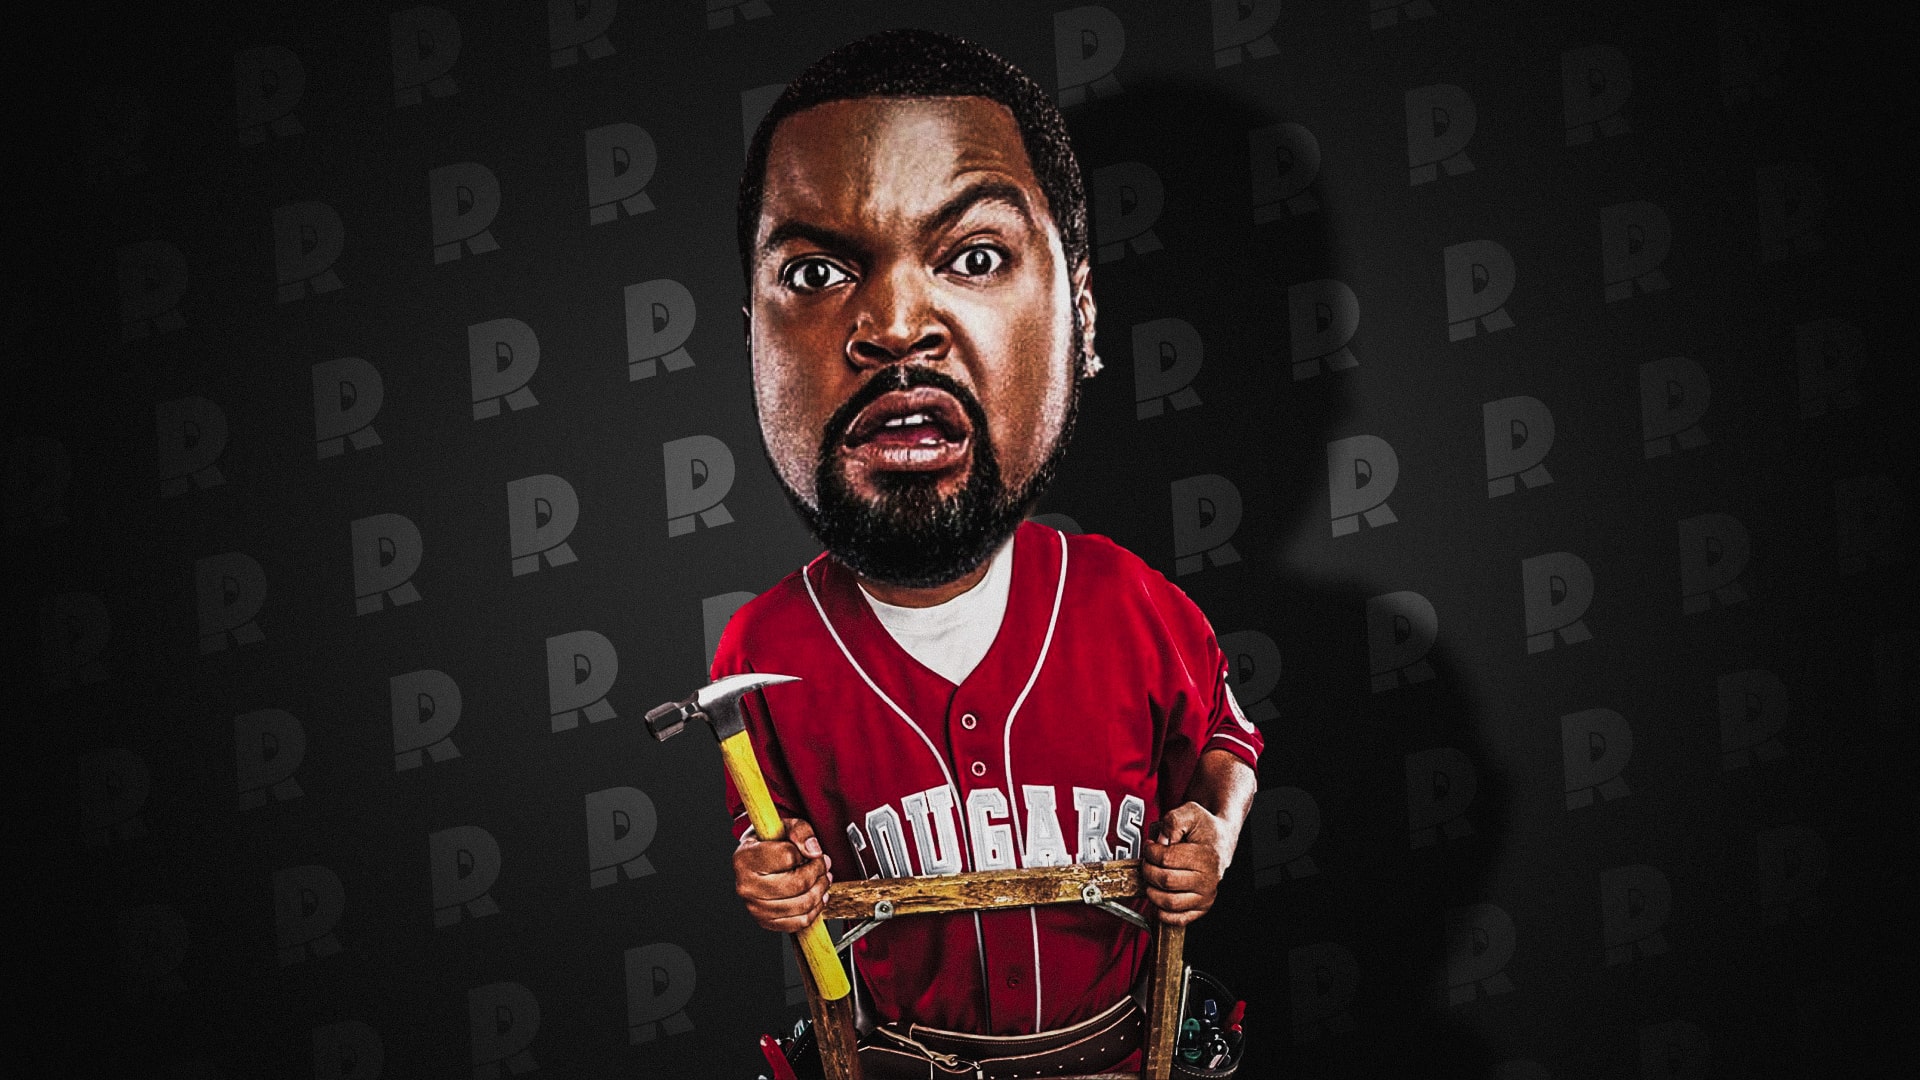 Ice Cube Net worth $160 Million - Who Is the Richest Hip Hop Artist in the World of 2022?